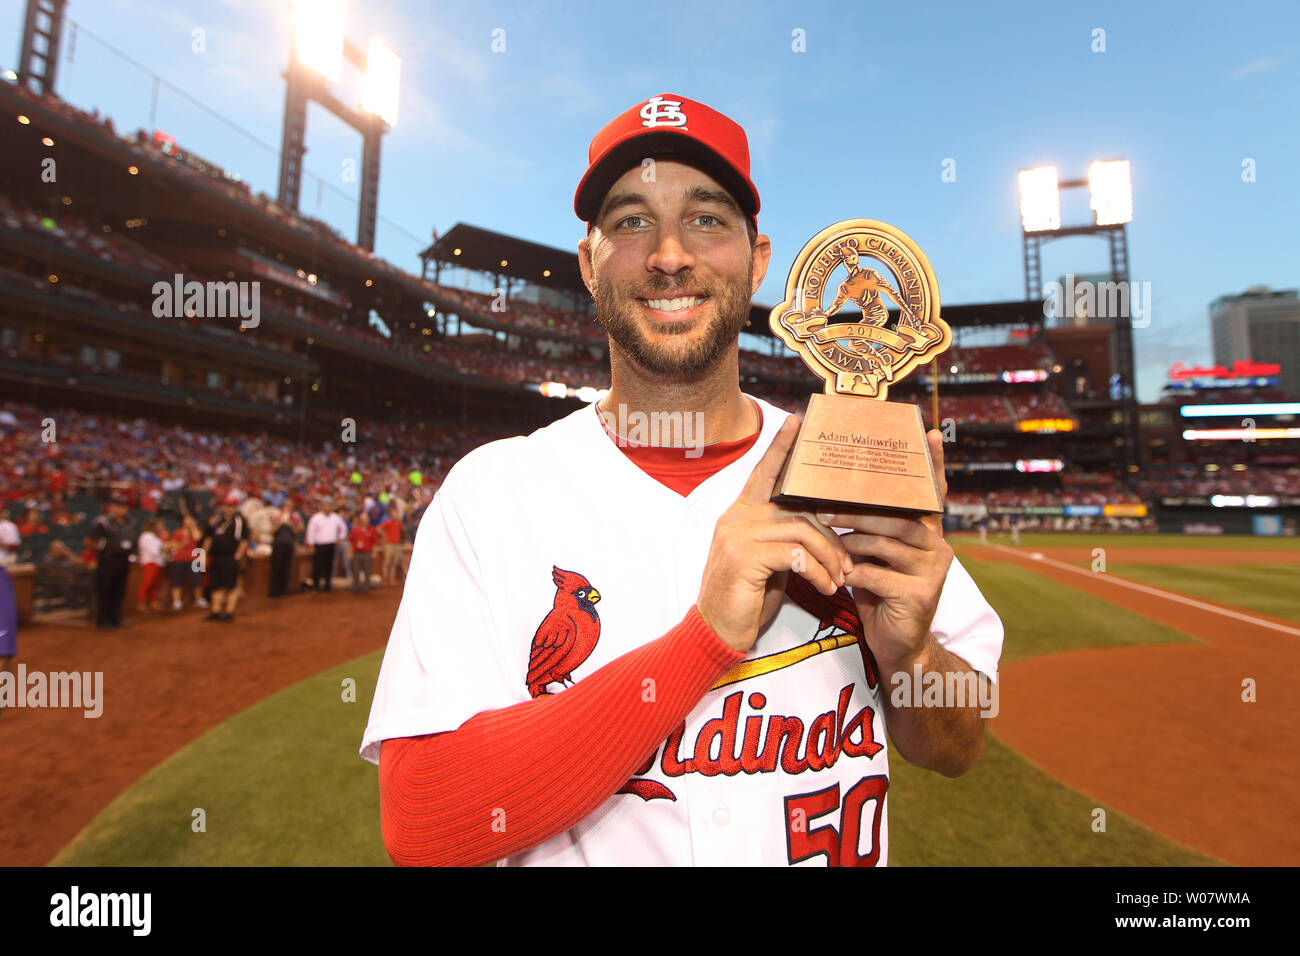 St. Louis Cardinals pitcher Adam Wainwright shows off his trophy after it  is announced that he is the team's 2016 nominee for Roberto Clemente Award,  before a game against the Chicago Cubs